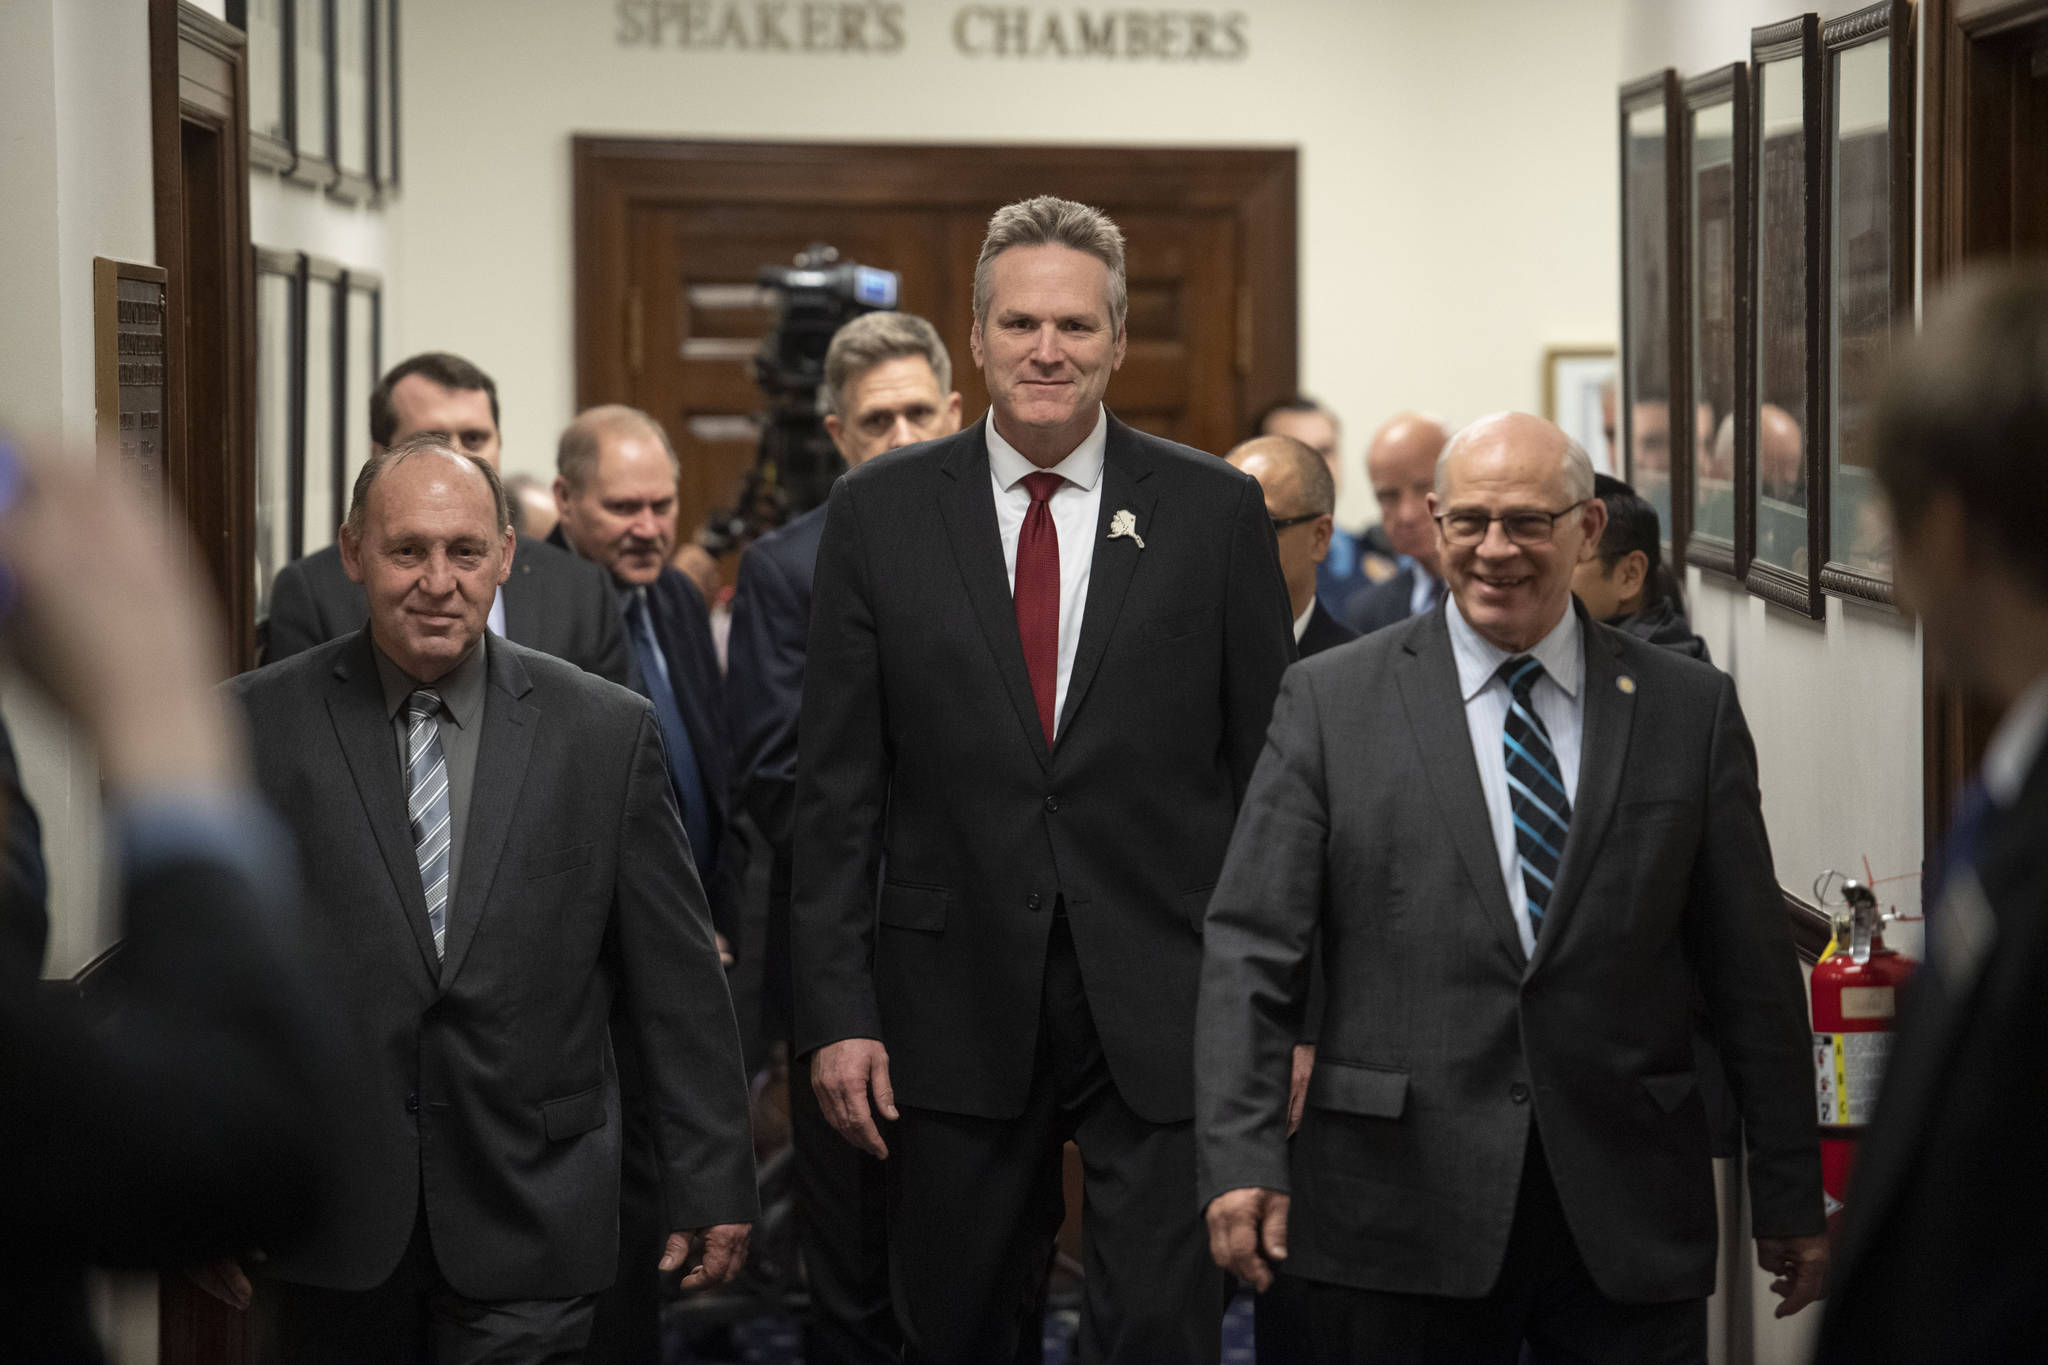 Sen. John Coghill, R-North Pole, right, and Rep. Gary Knopp, R-Kenai, left, escort Gov. Mike Dunleavy to the House chambers to deliver his State of the State speech to a Joint Session of the Alaska Legislature at the Alaska State Capitol in Juneau, Alaska, on Monday, Jan. 27, 2020. (AP Photo/Michael Penn)